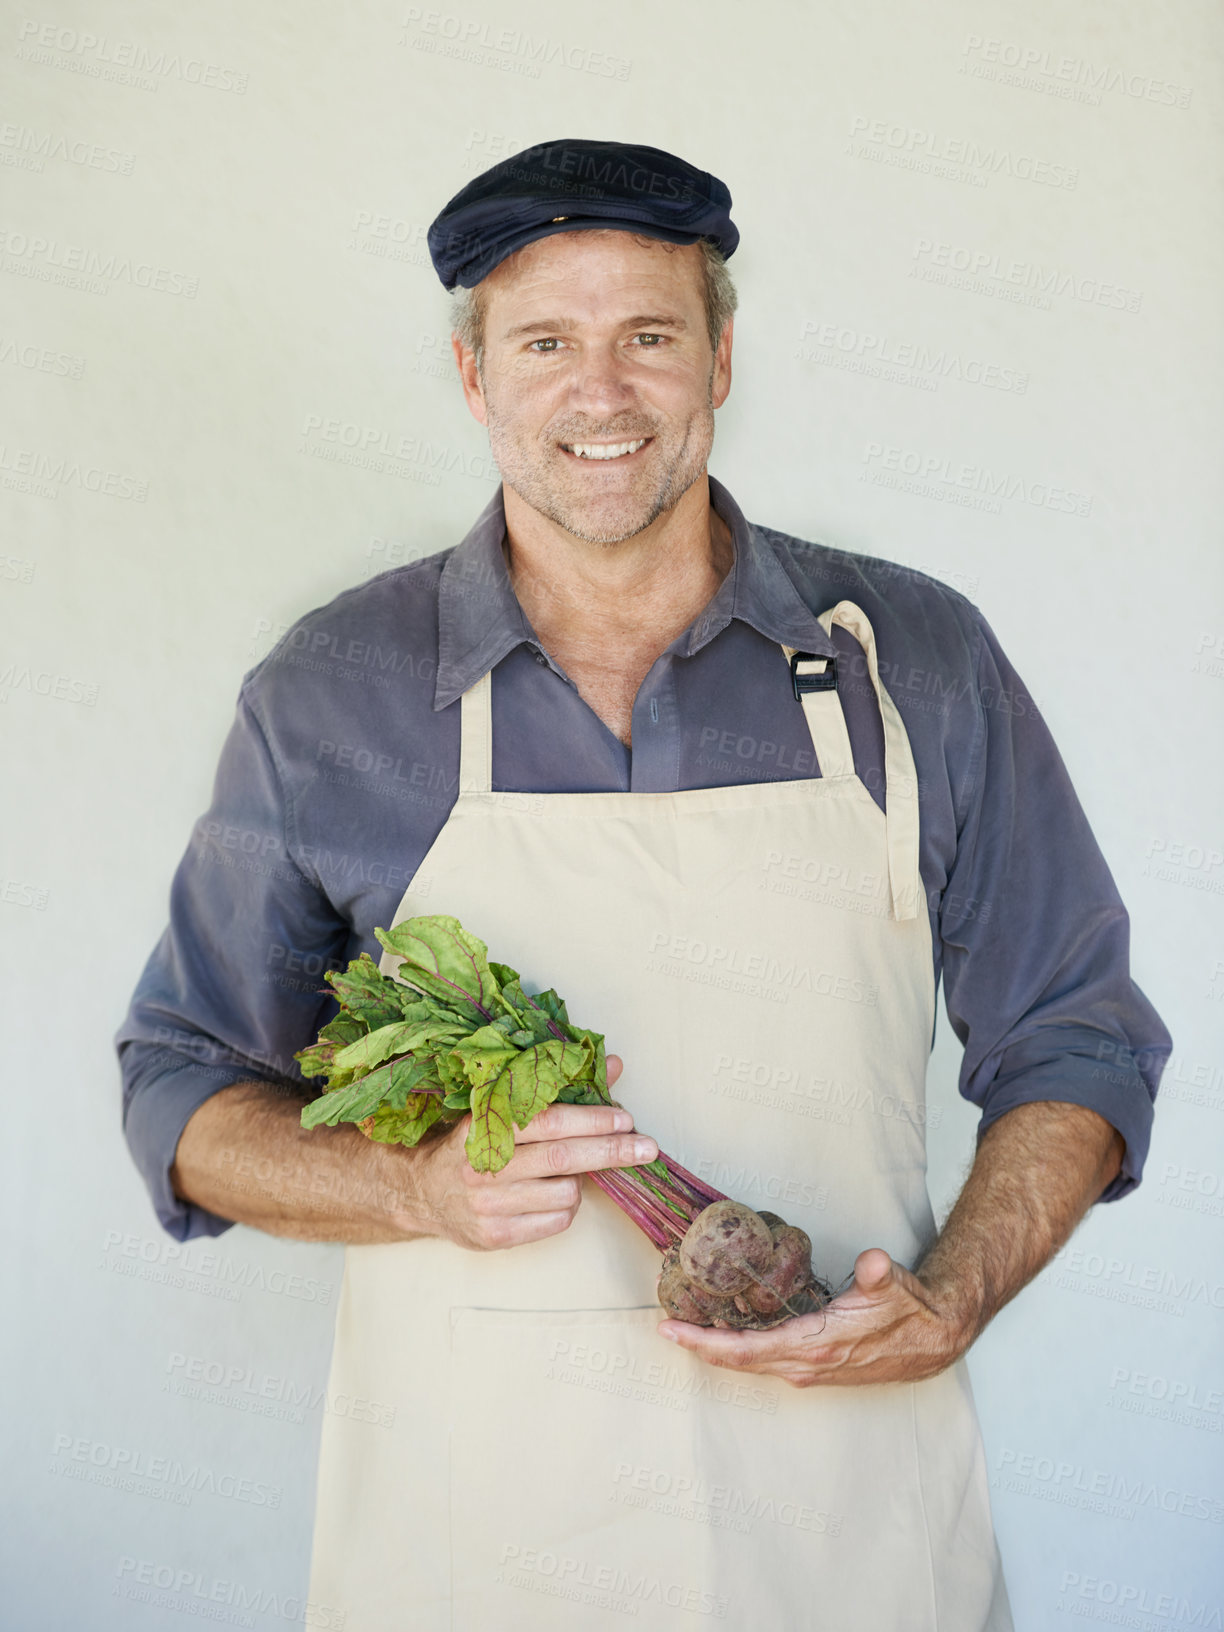 Buy stock photo Farmer, vegetables and portrait of man with onions for agriculture, harvest or organic food by wall. Growth, fresh produce and male person with apron for agro business, gardening or sustainability